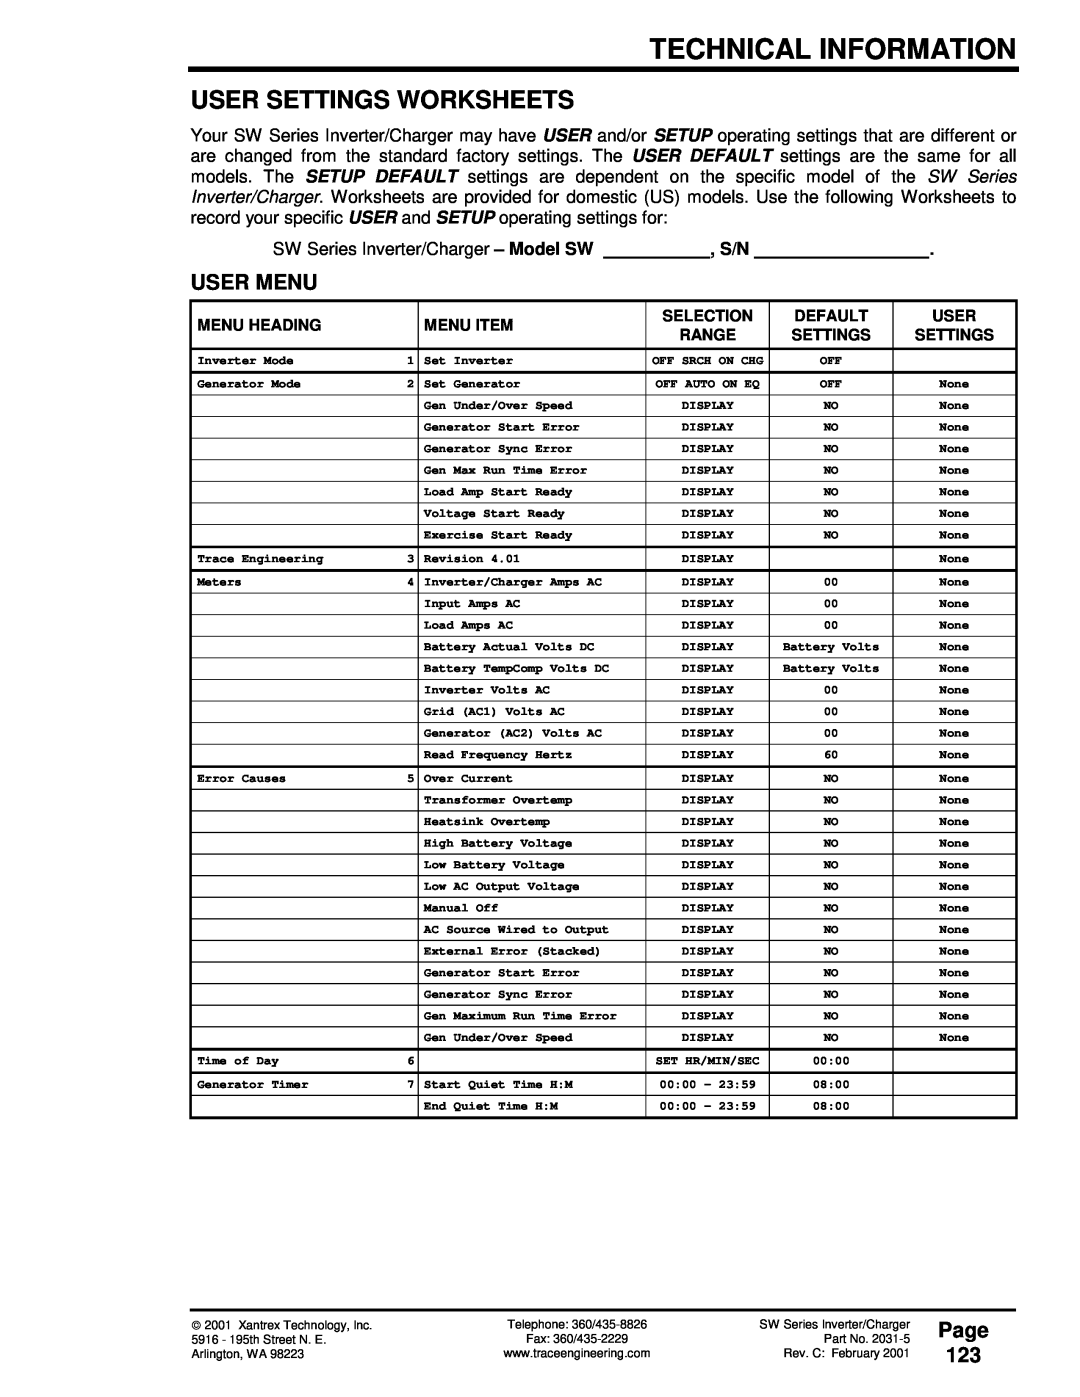 Xantrex Technology 120 VAC/60 User Settings Worksheets, User Menu, Page 123, SW Series Inverter/Charger - Model SW 